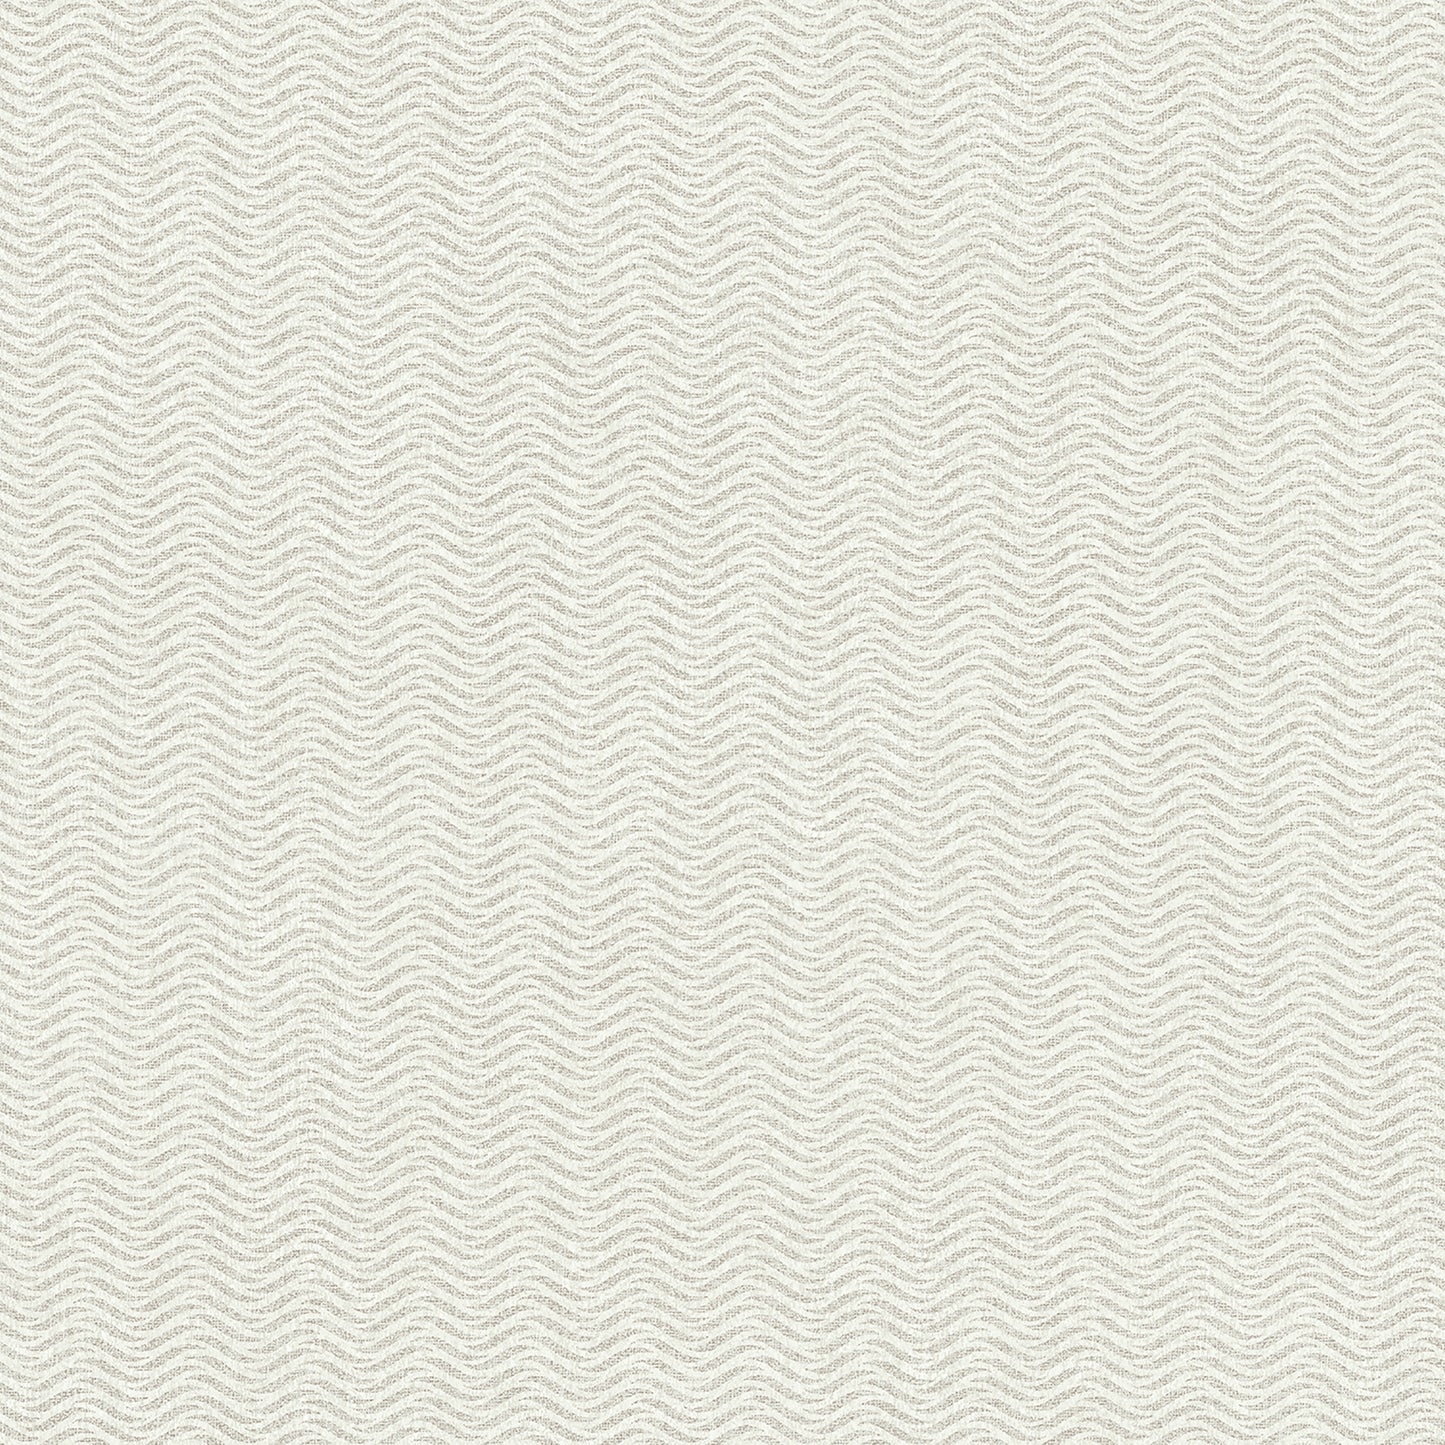 Order 4020-75907 Geo & Textures Jude Taupe Woven Waves Taupe by Advantage